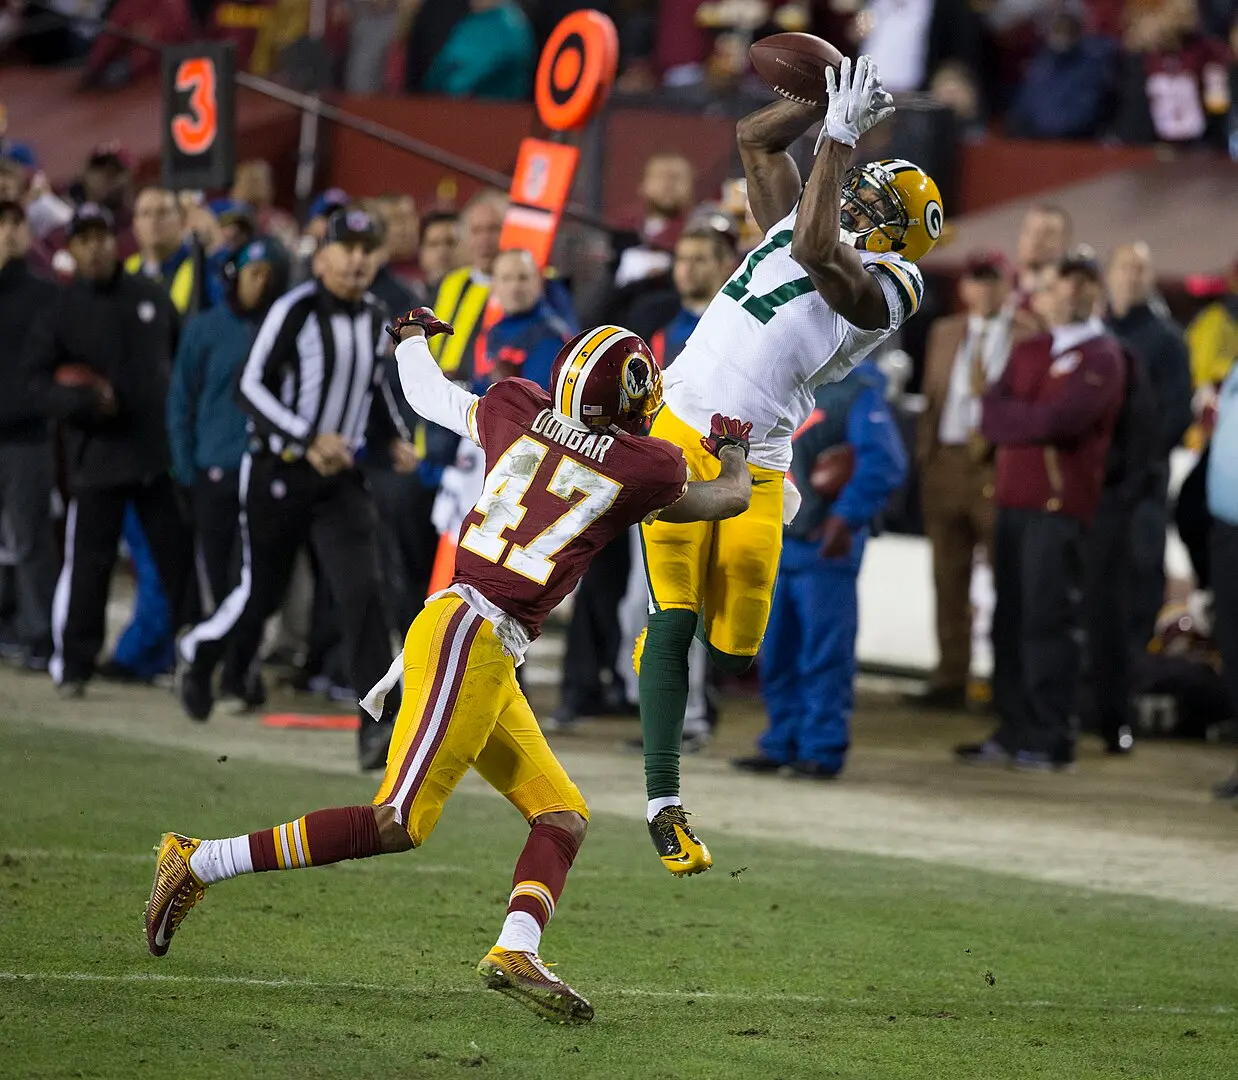 Adams catching a pass over Washington Redskins cornerback Quinton Dunbar during the Packers-Redskins playoff game in 2016